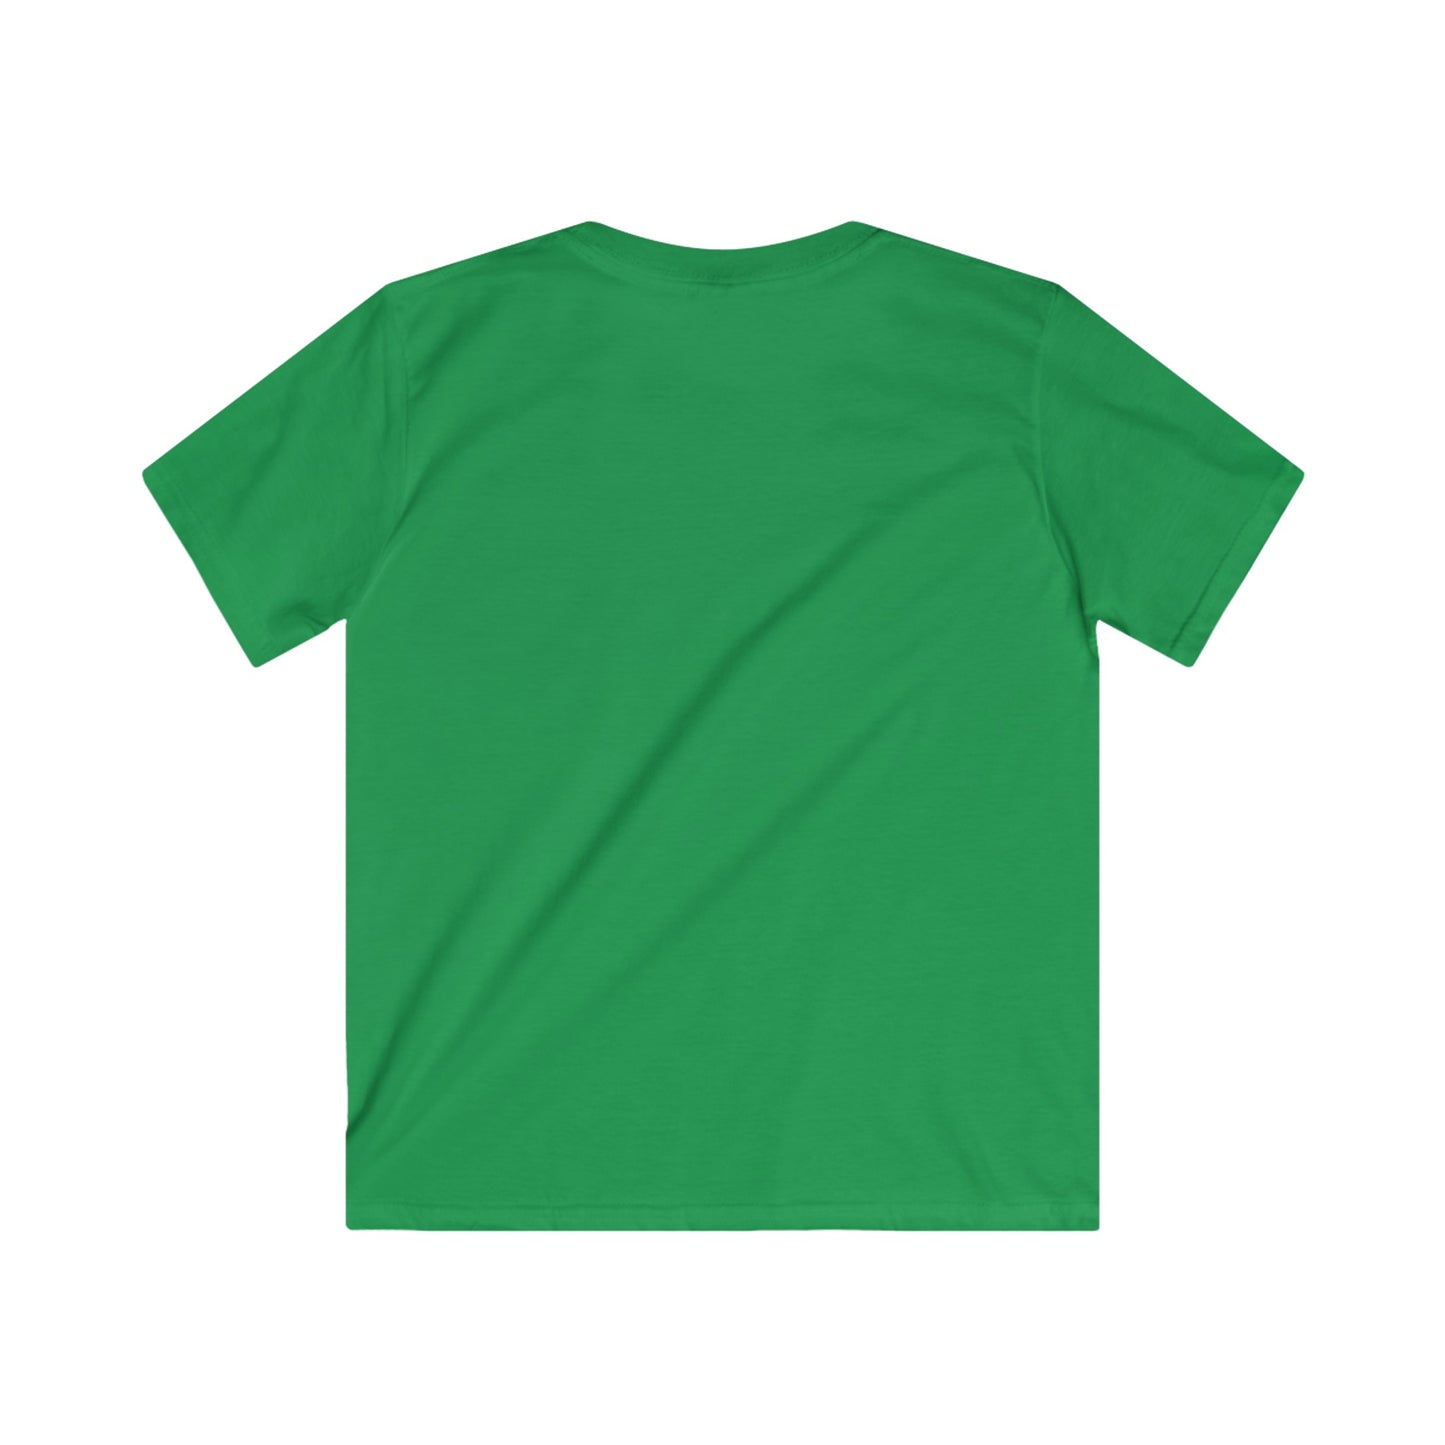 Solid Green. Kids Softstyle Tee